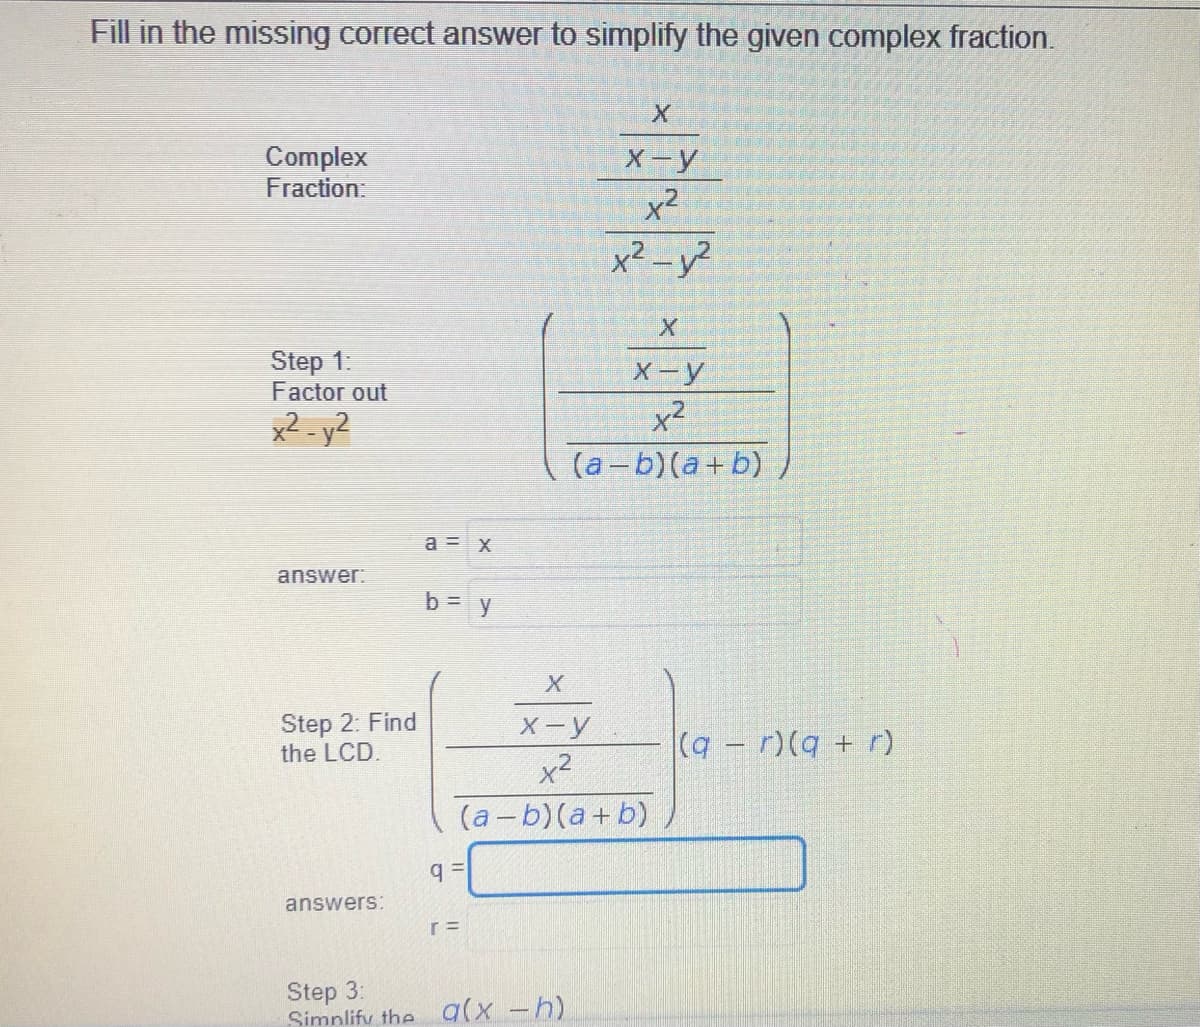 Fill in the missing correct answer to simplify the given complex fraction.
Complex
Fraction
X-y
x²
x² -y?
Step 1:
Factor out
X-y
x2 - y²
x2
(а-b) (а+ b)
a = x
answer:
b= y
Step 2: Find
the LCD.
X-y
(q-r)(q + r)
x2
(a-b)(a+ b)
answers:
Step 3:
Simnlify the a(x -h)
